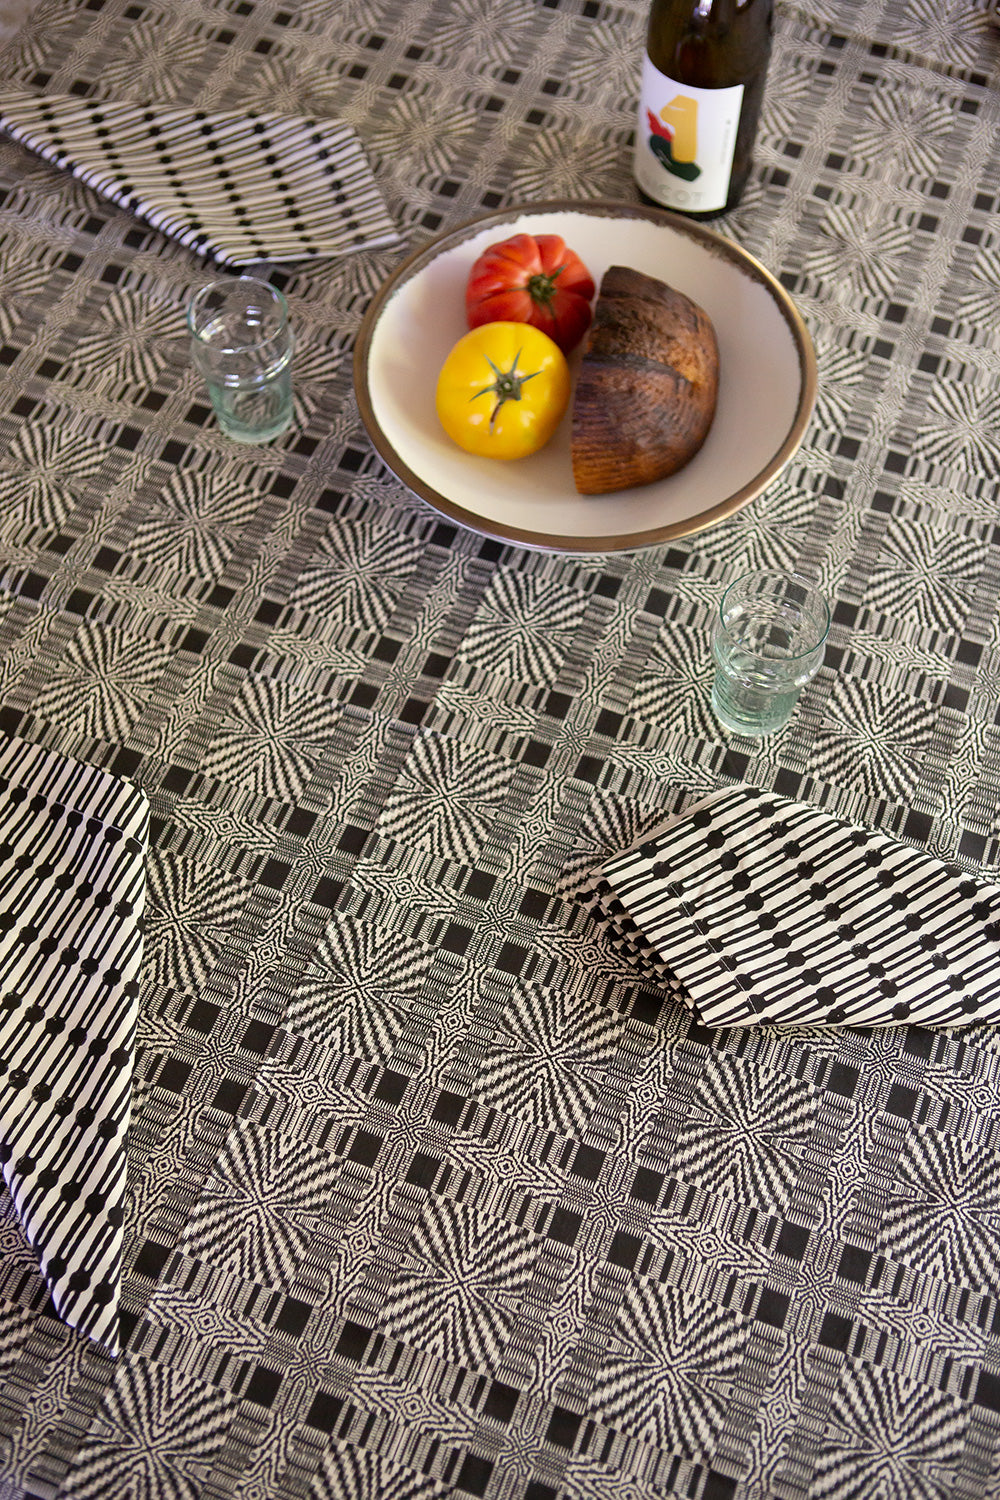 Cotton Tablecloth In Natural And Black Edgar Allan Poe